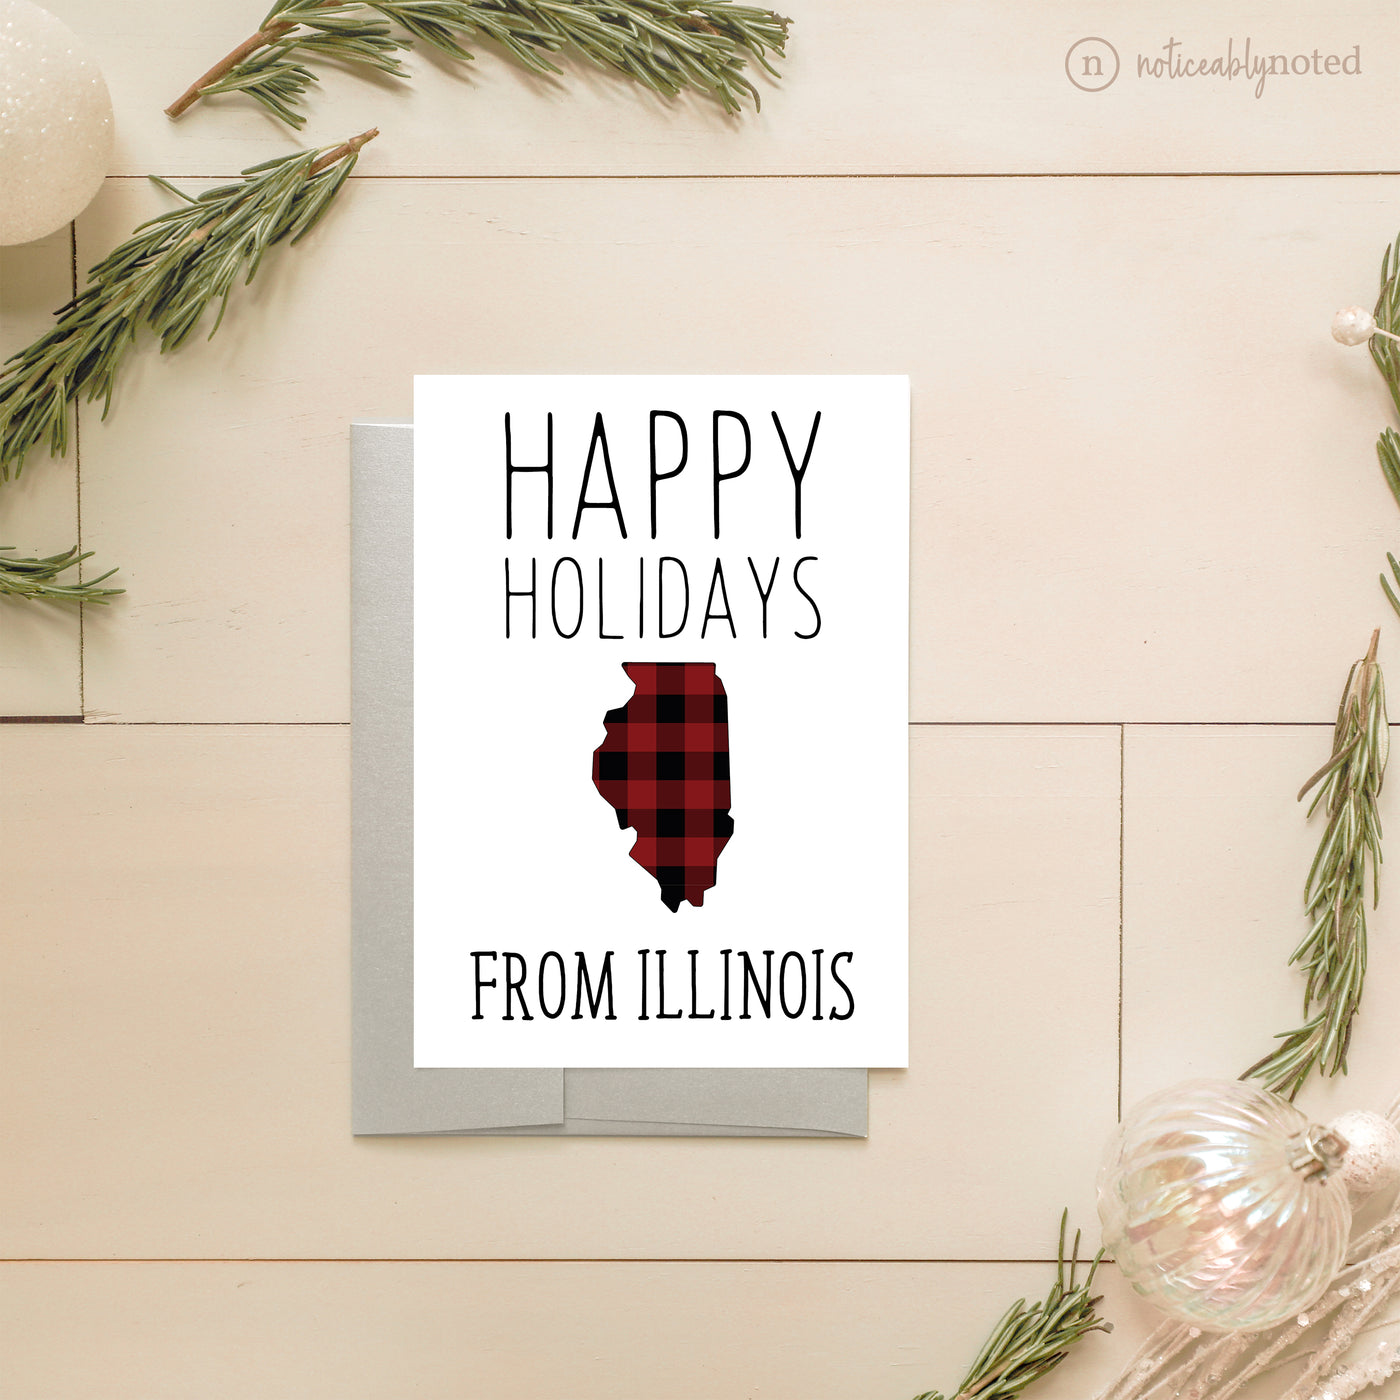 Illinois Holiday Card | Noticeably Noted